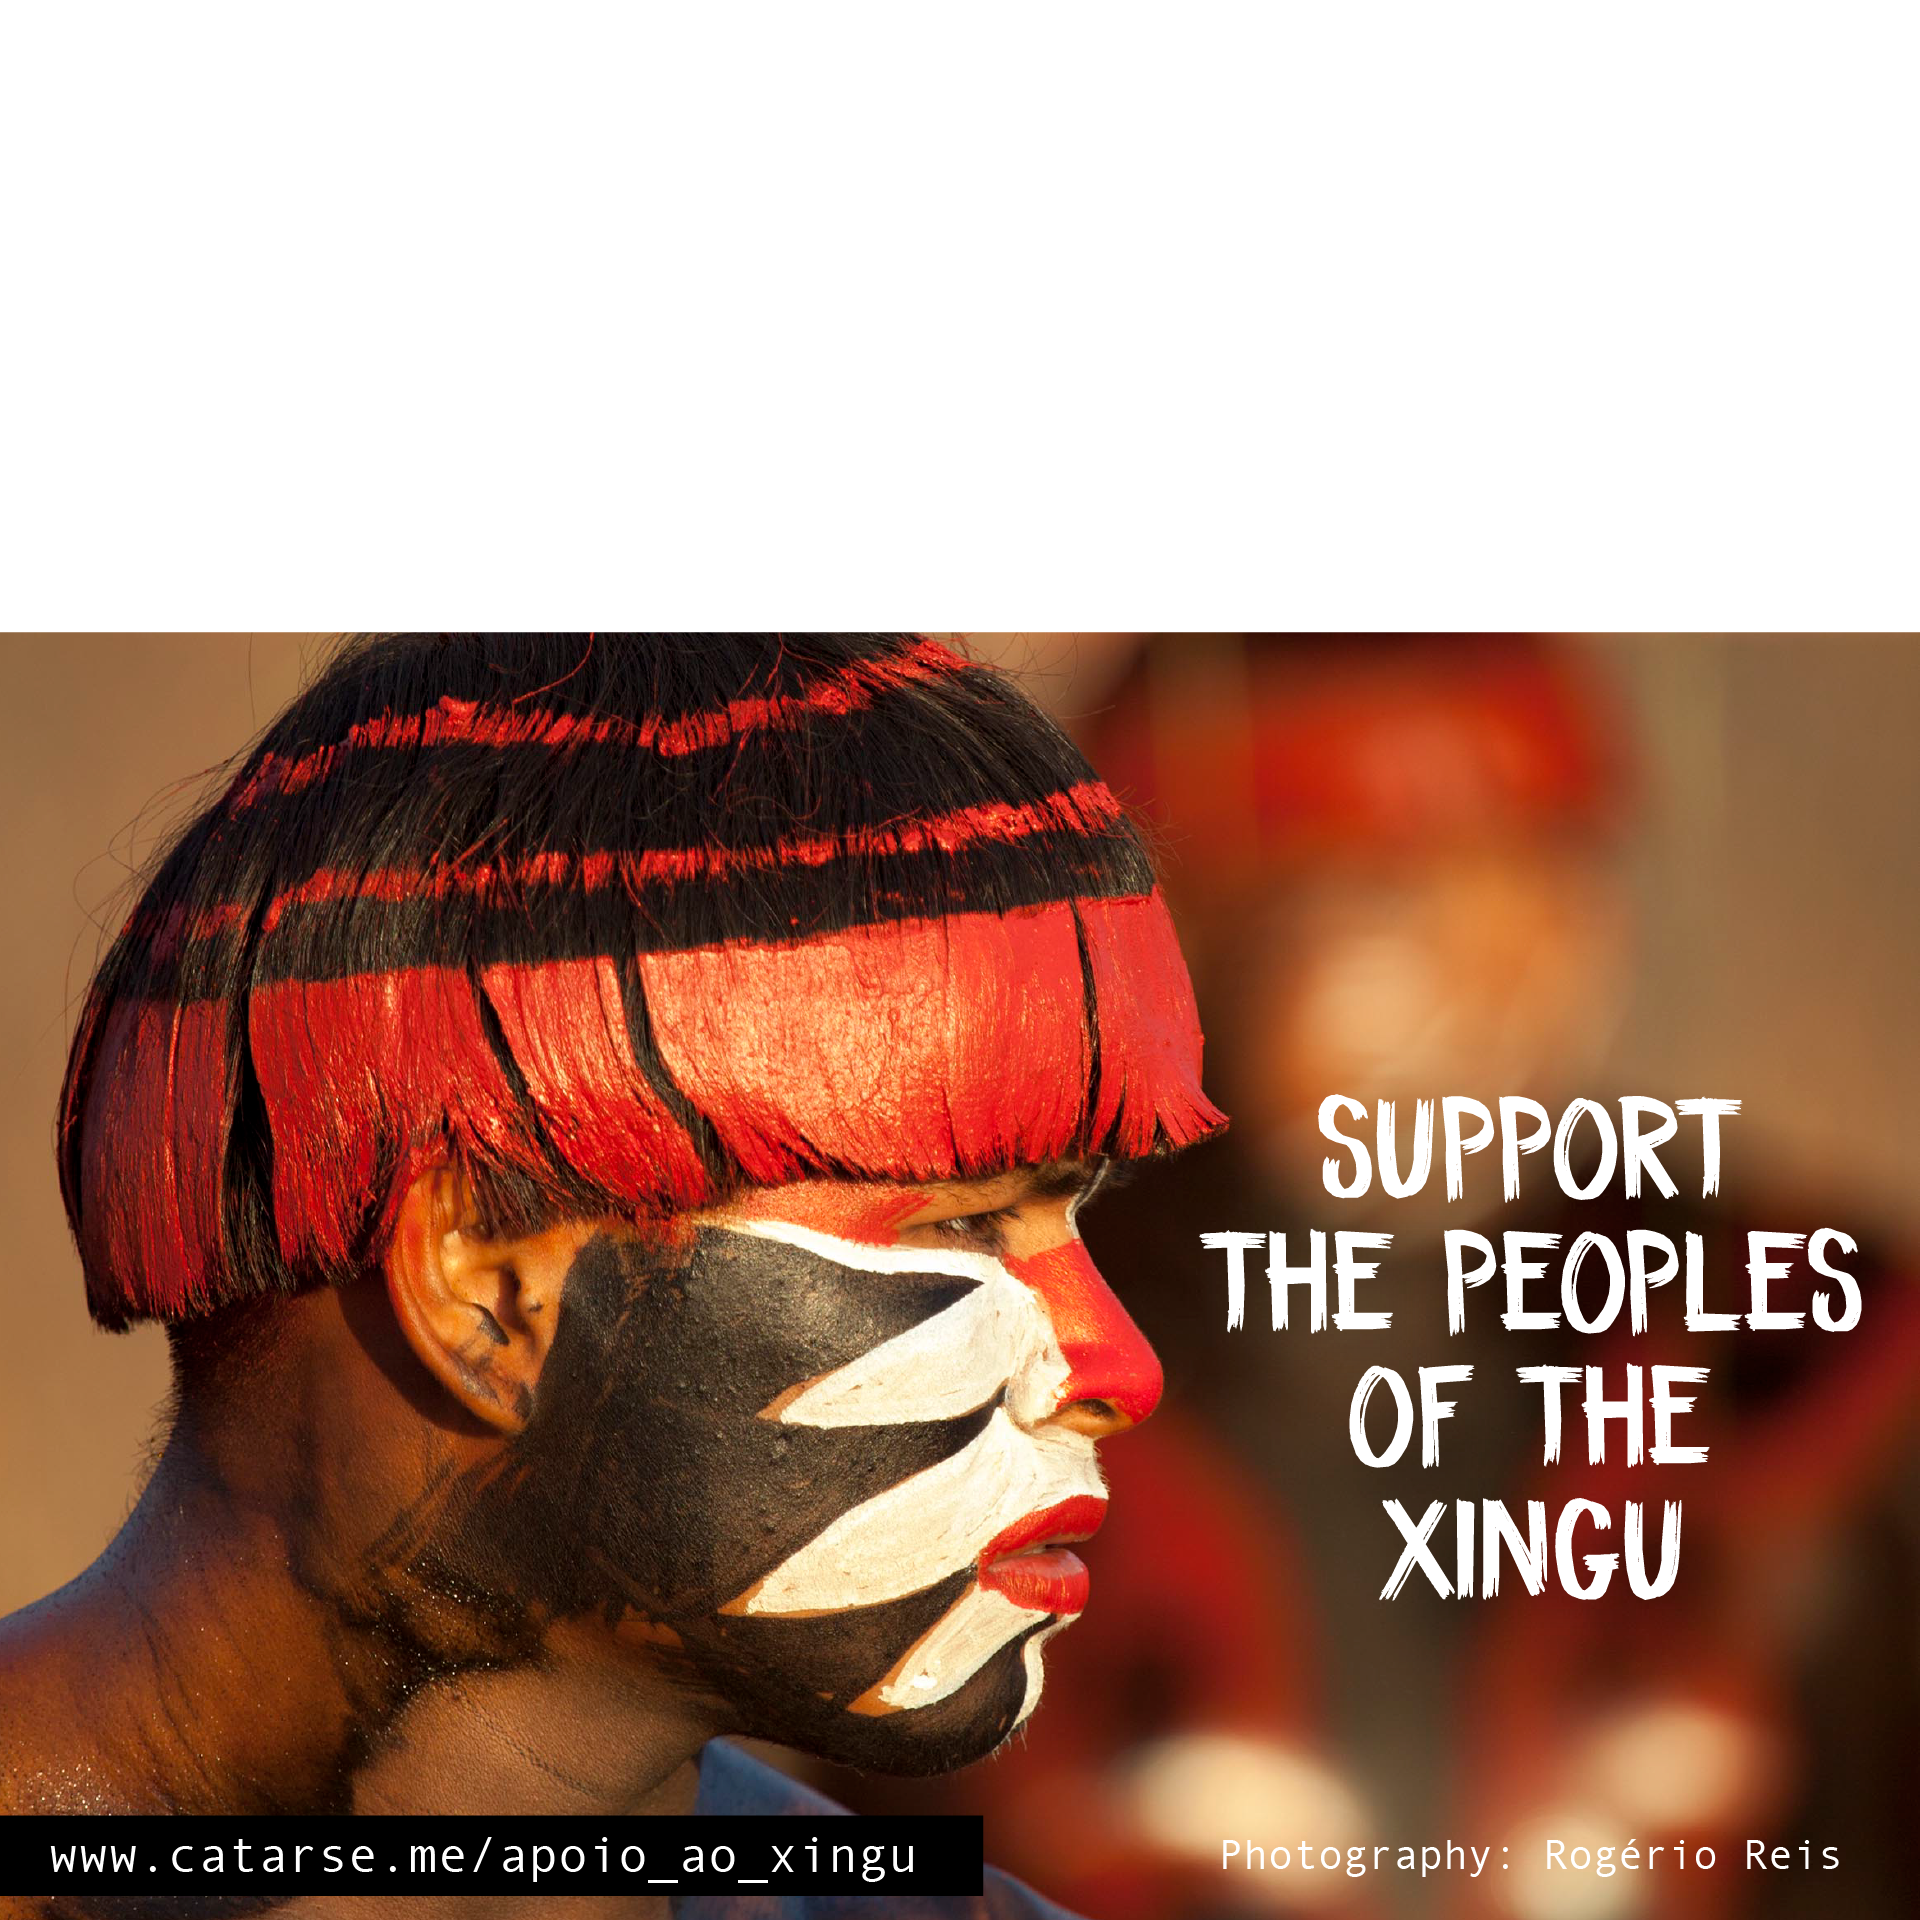 Support the Xingu Campaign